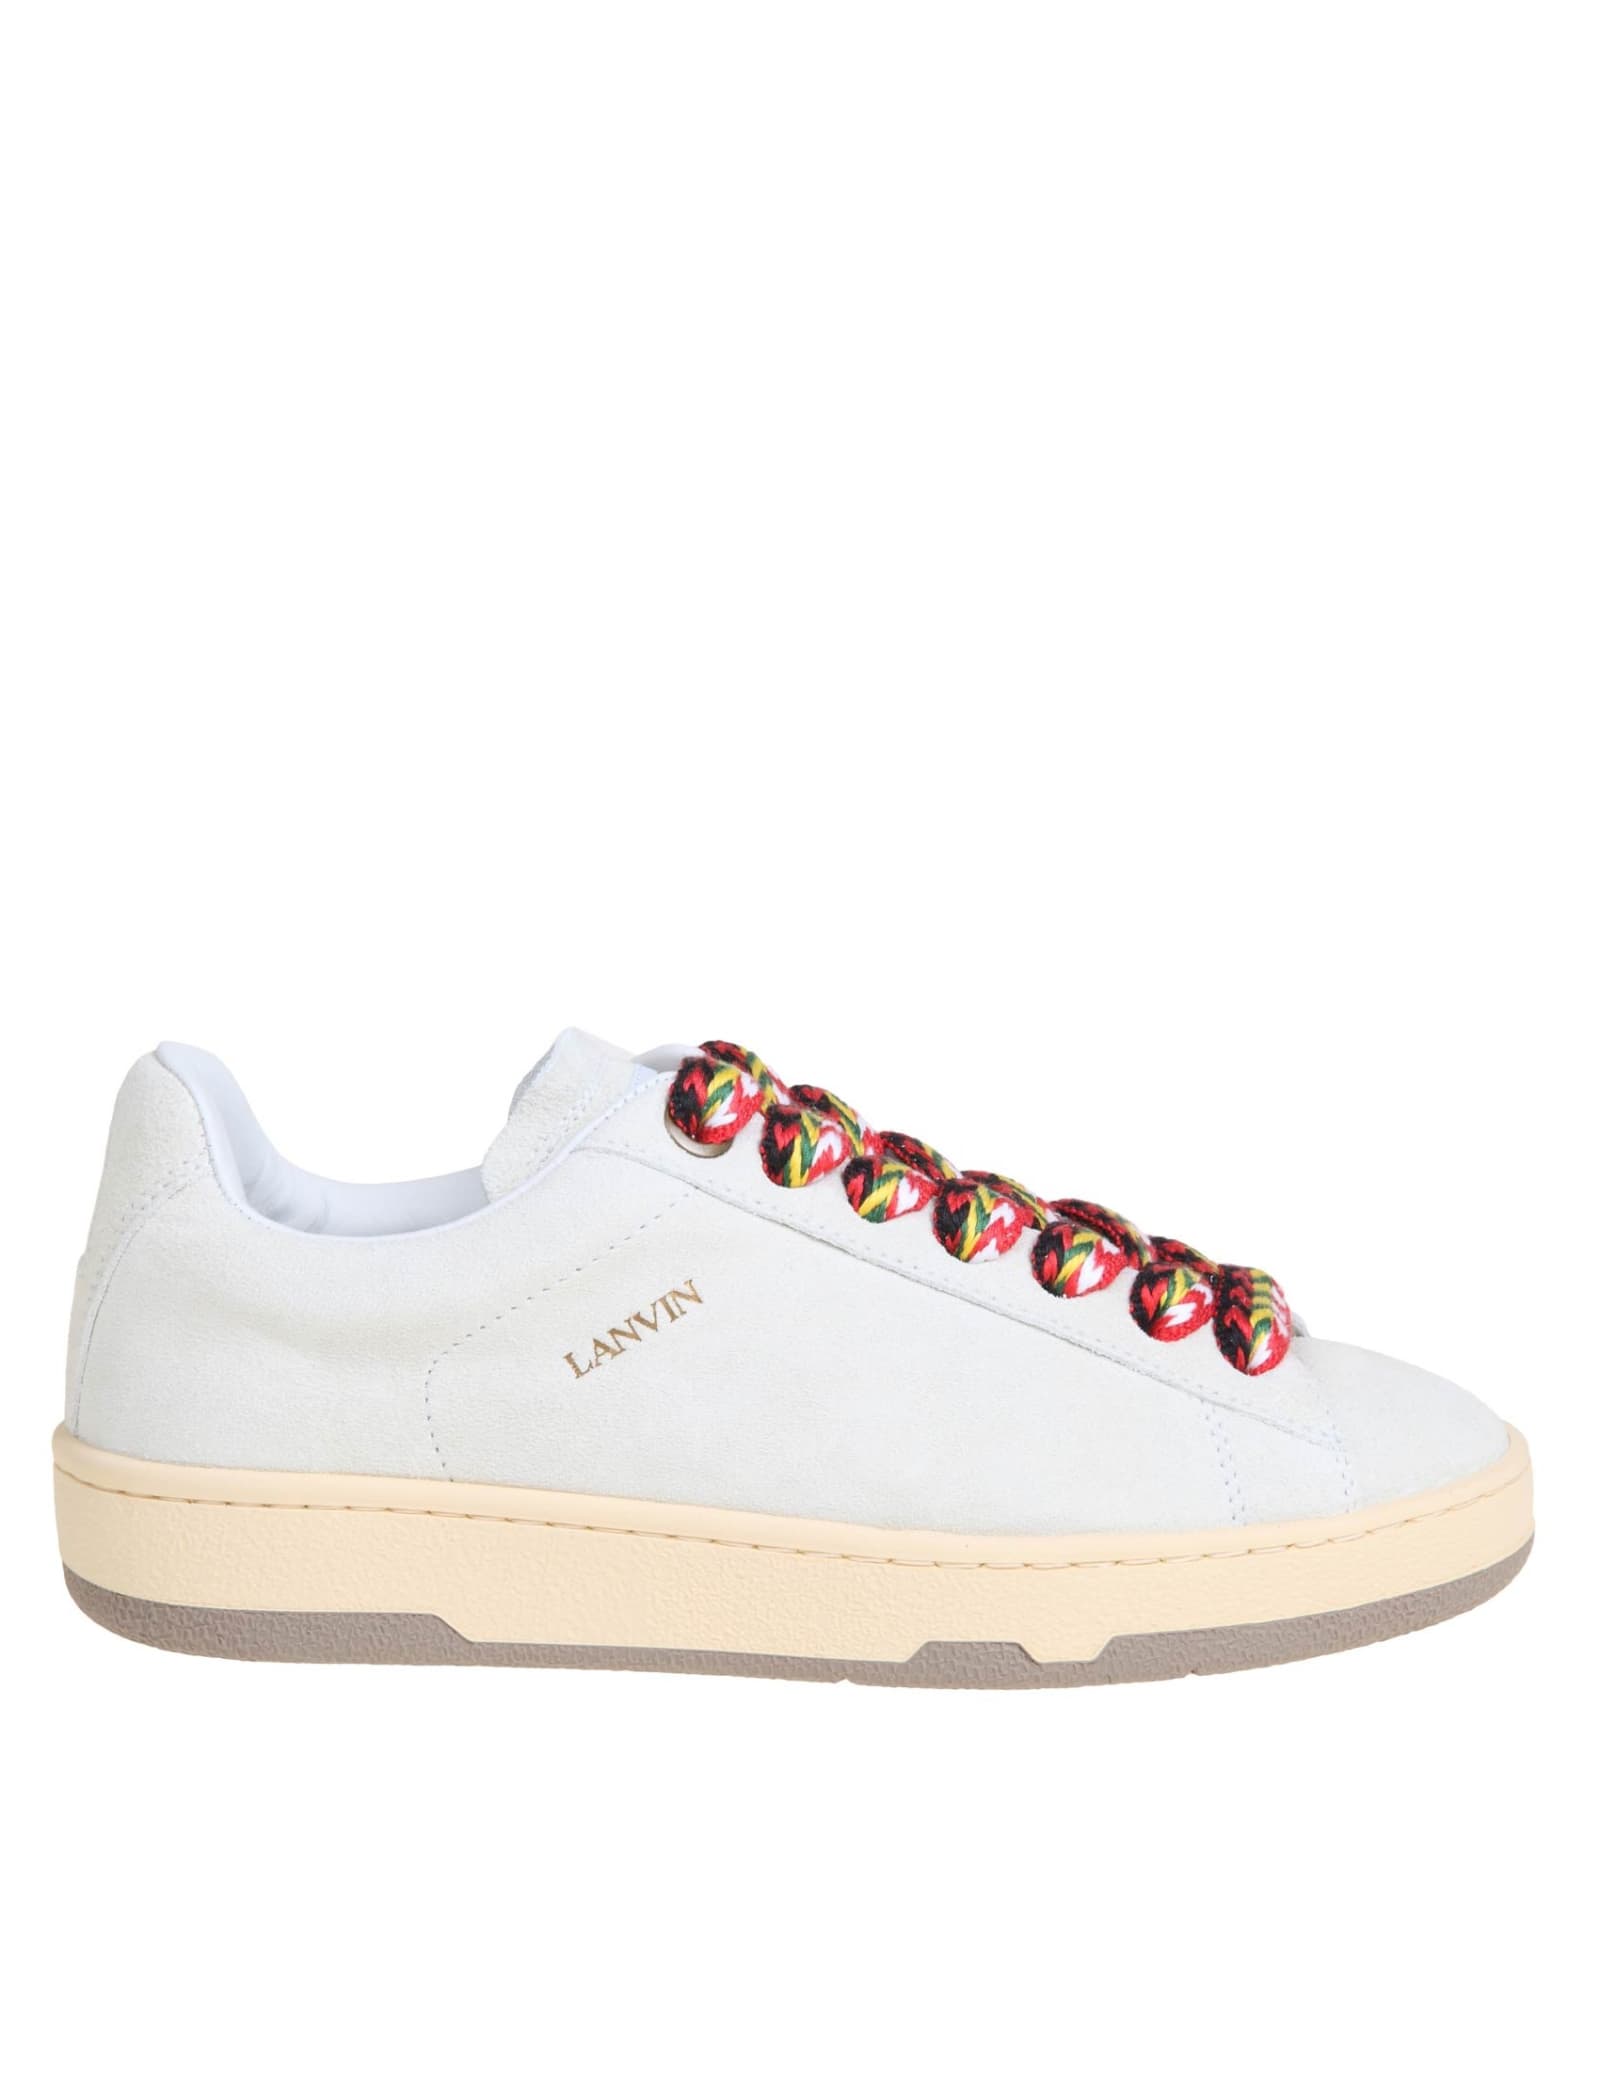 LANVIN LITE CURB SNEAKERS IN LEATHER COLOR WHITE